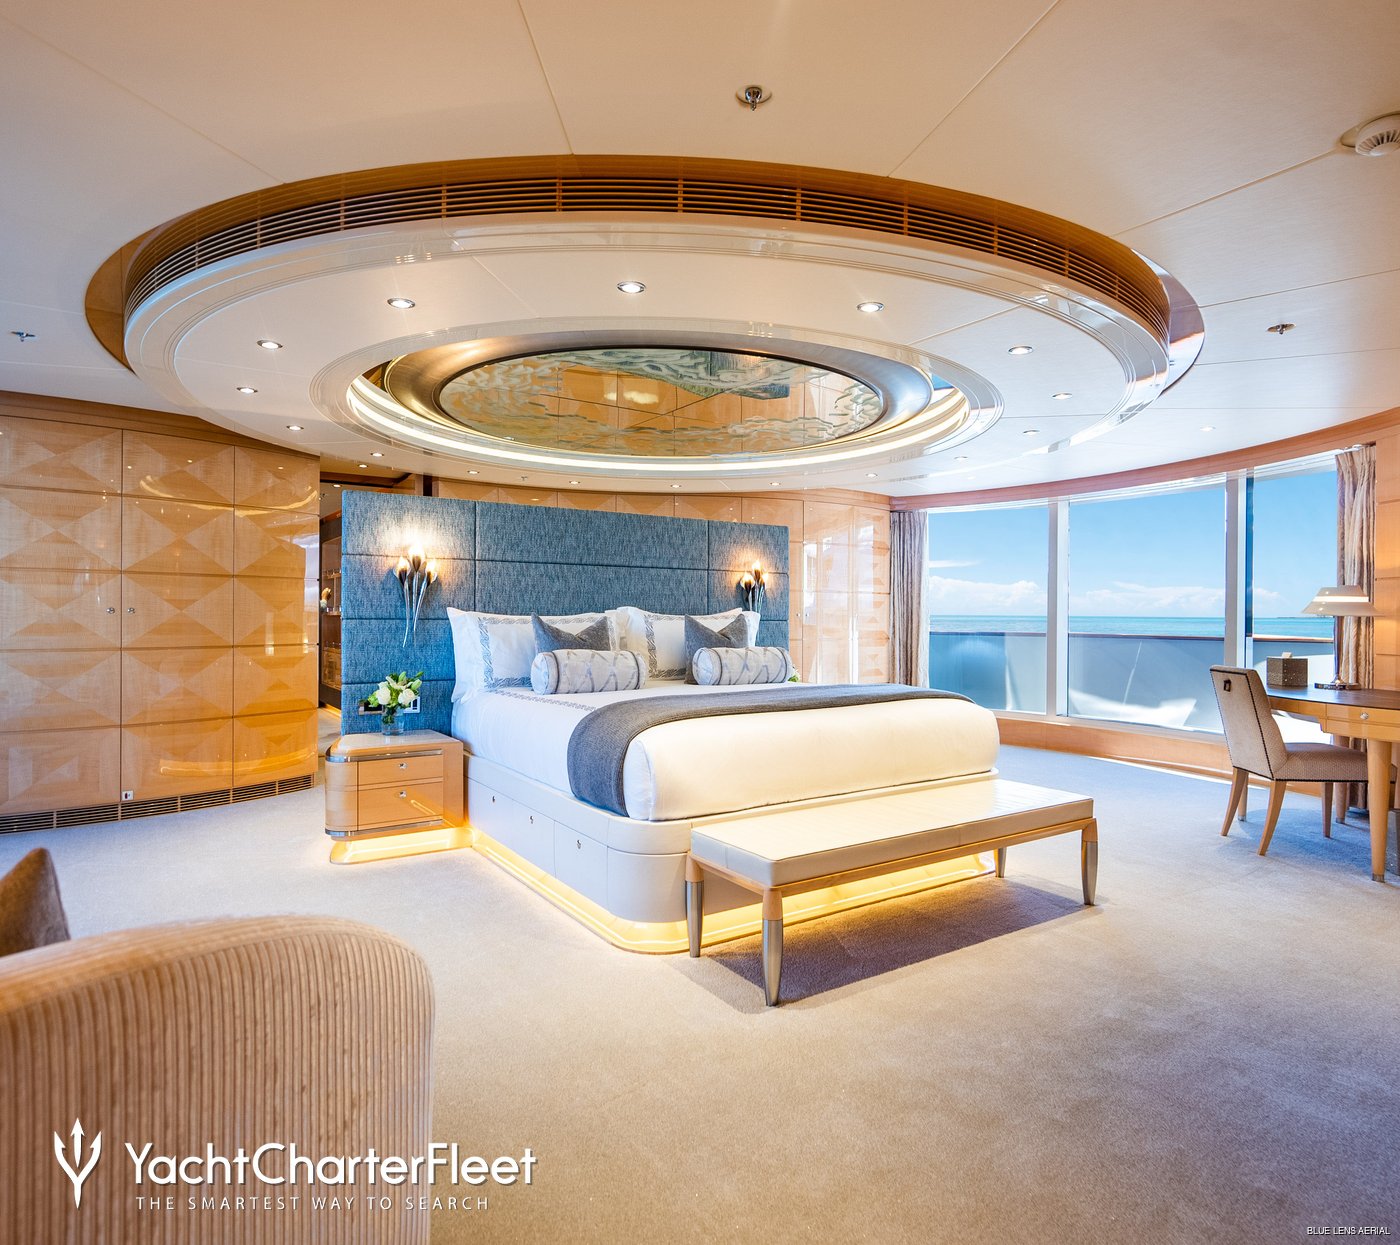 Why Charter A Yacht: Room With Views On A Yacht